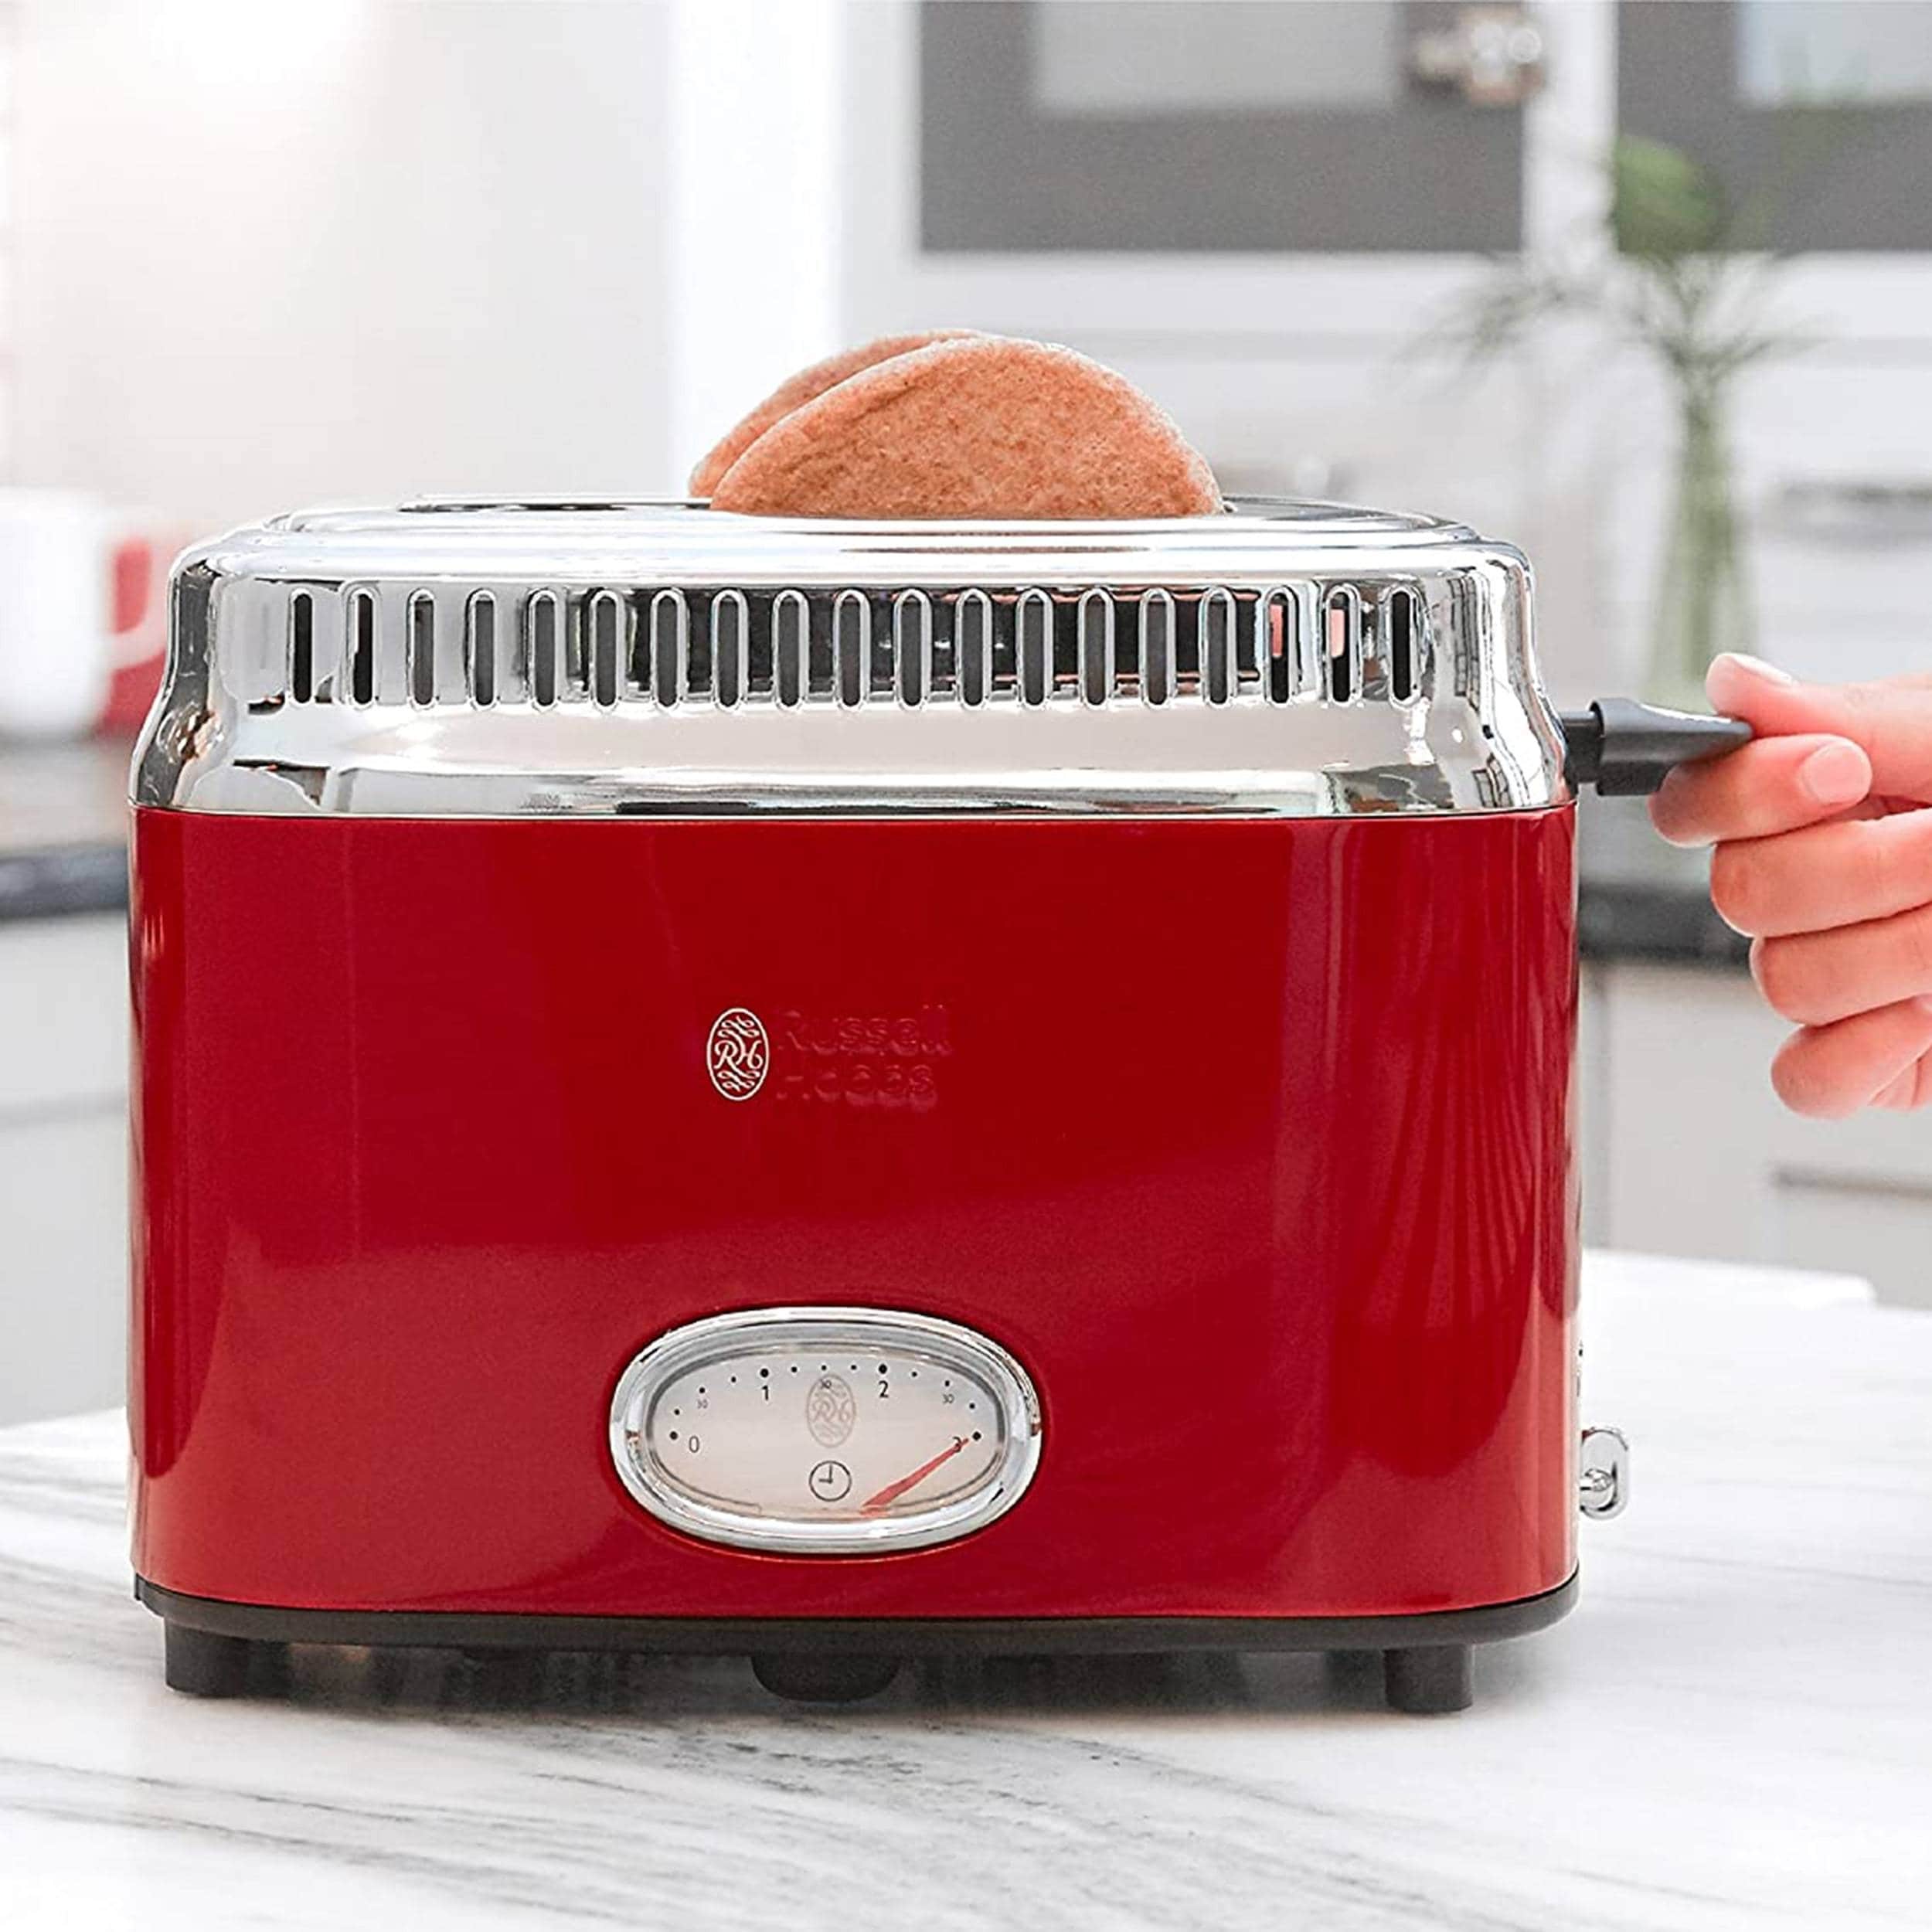 Russell Hobbs Toasters at